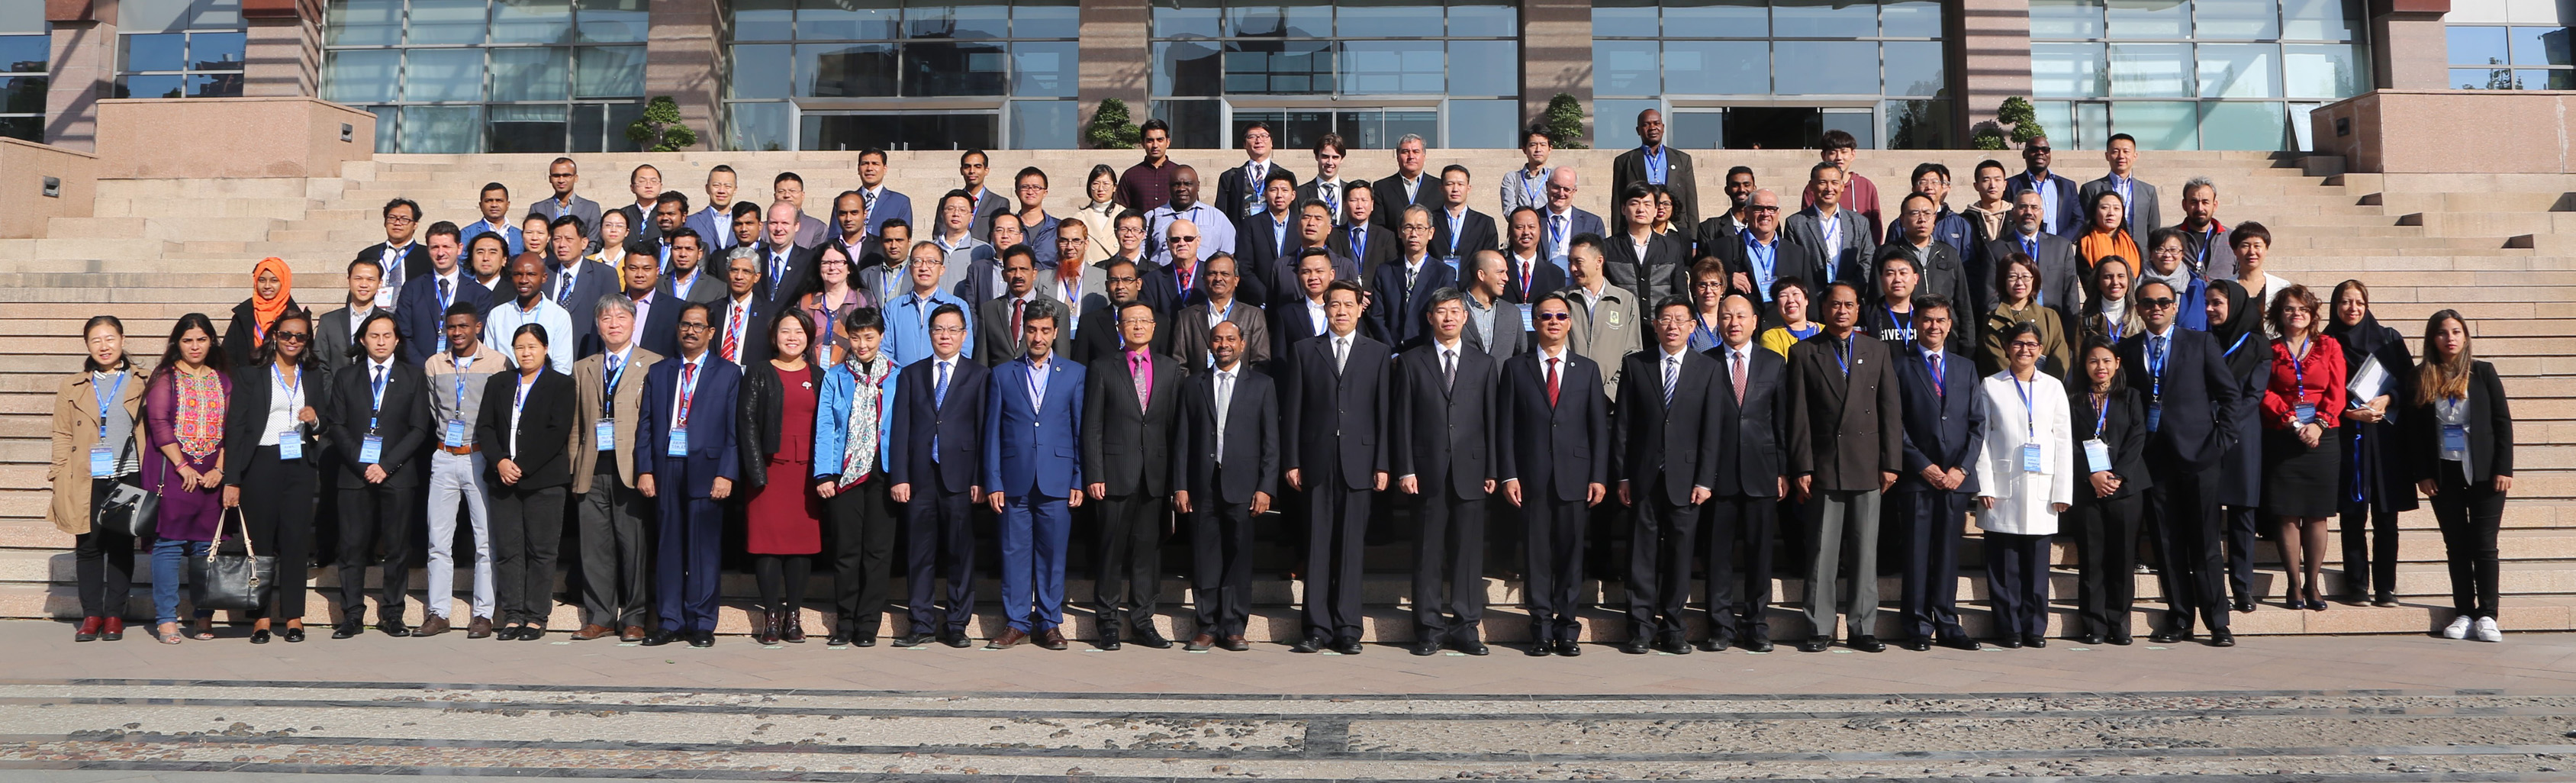 Participants of the UN-SPIDER conference in Beijing.